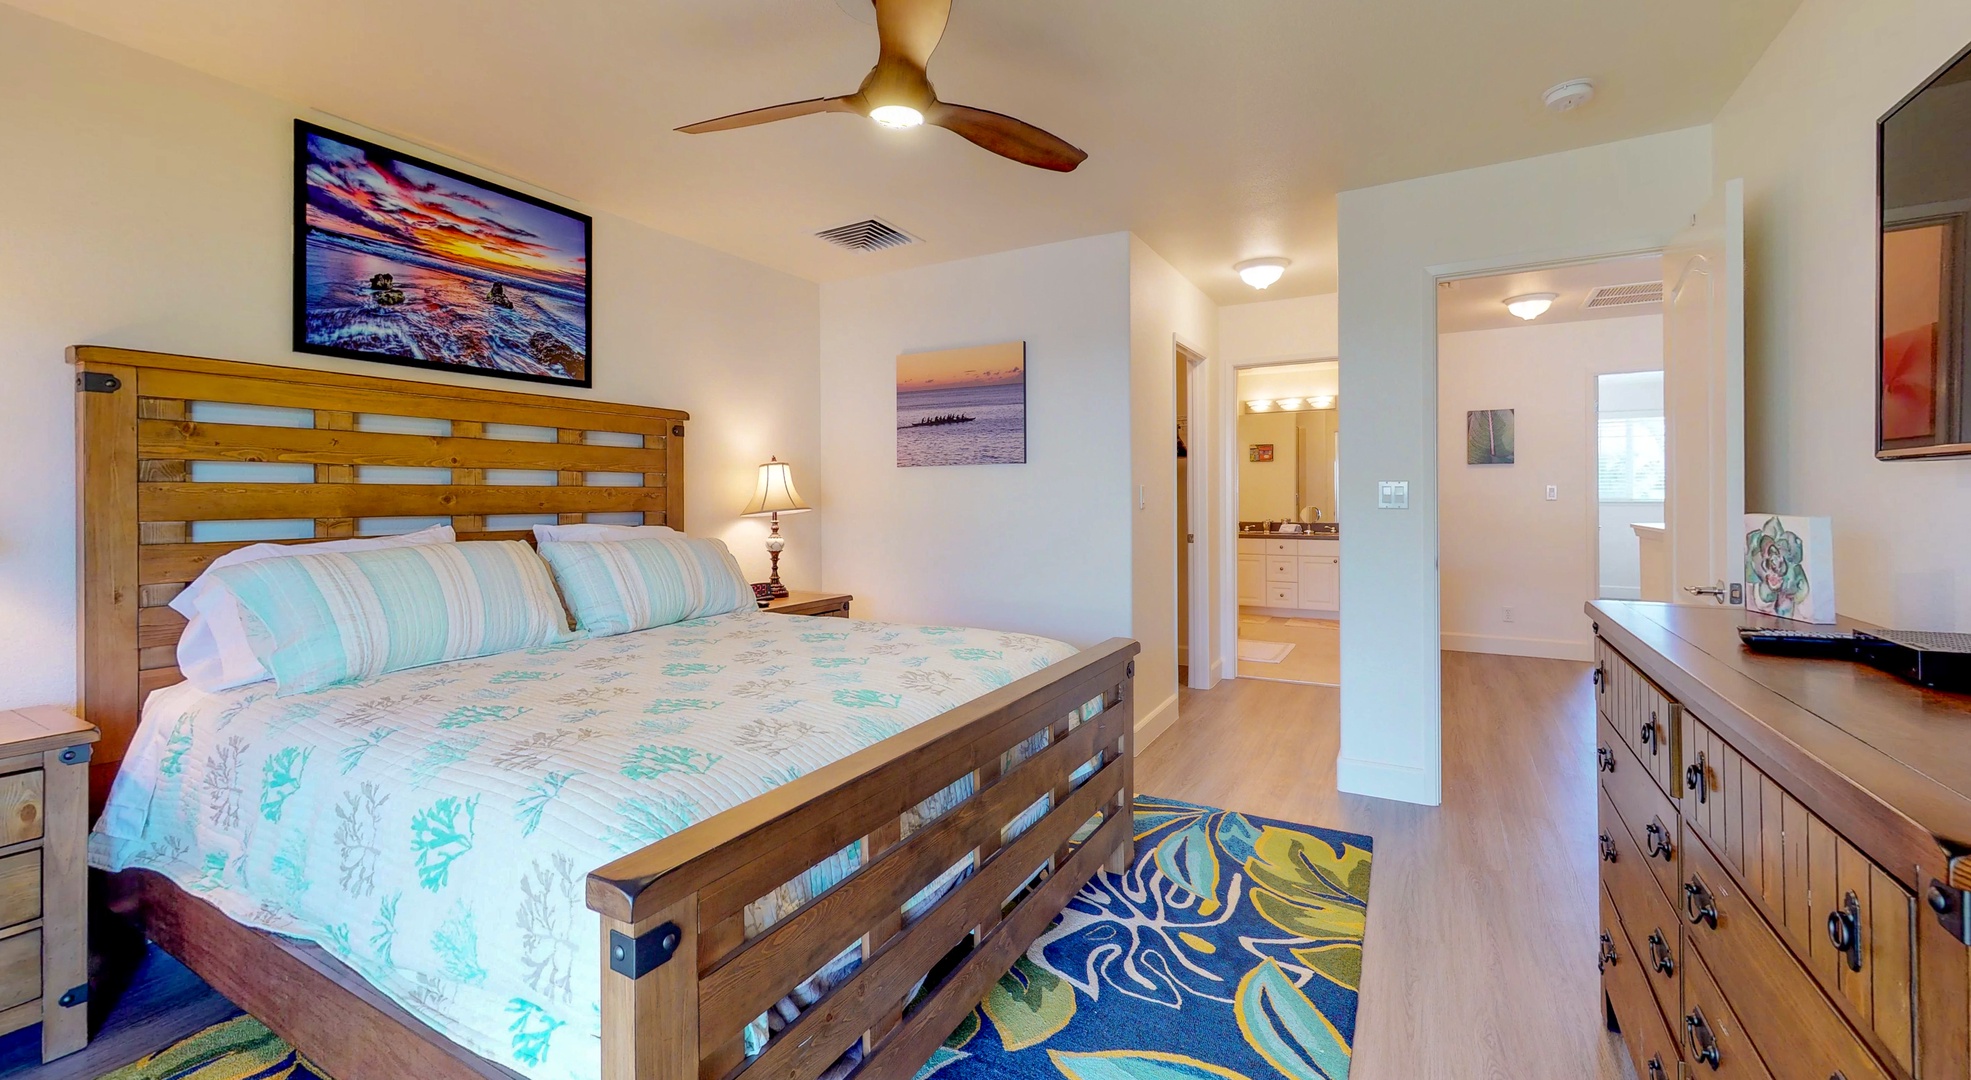 Kapolei Vacation Rentals, Ko Olina Kai 1051D - The upstairs primary guest bedroom with access to a private lanai.